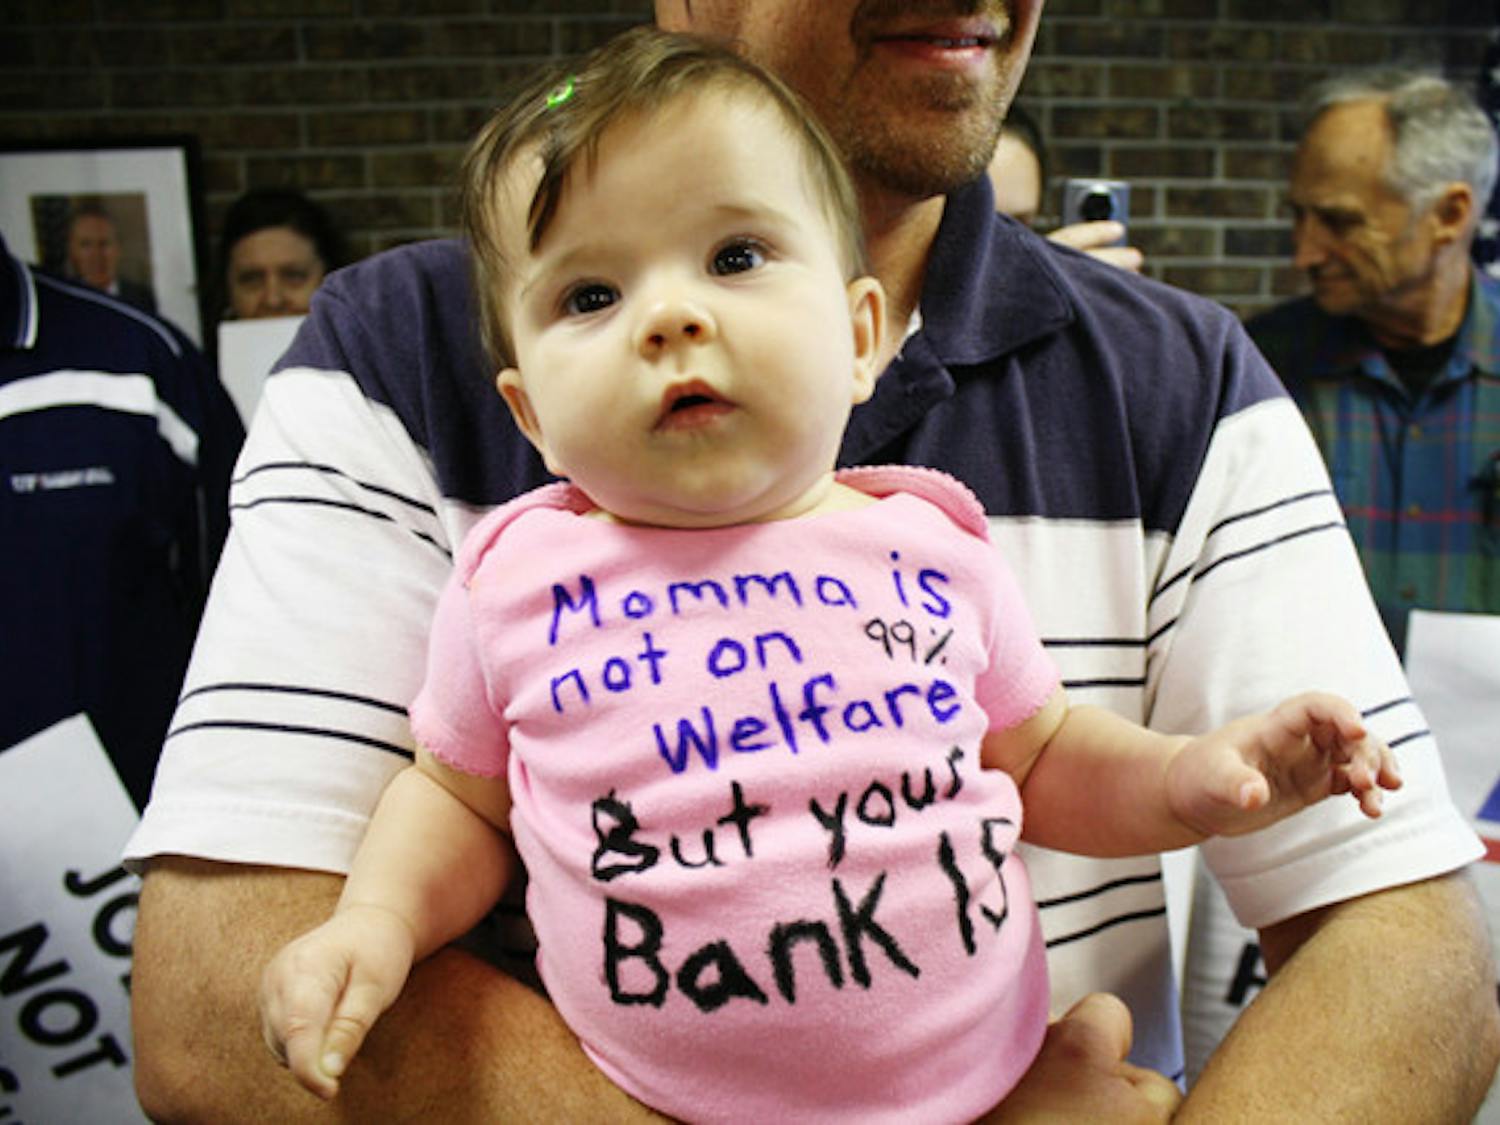 Seven-month-old Lumen sits in the arms of her father, Brian Klepp, during a MoveOn.org protest in U.S. Rep. Cliff Stearns' office Thursday. MoveOn.org members were supporting Occupy Wall Street.